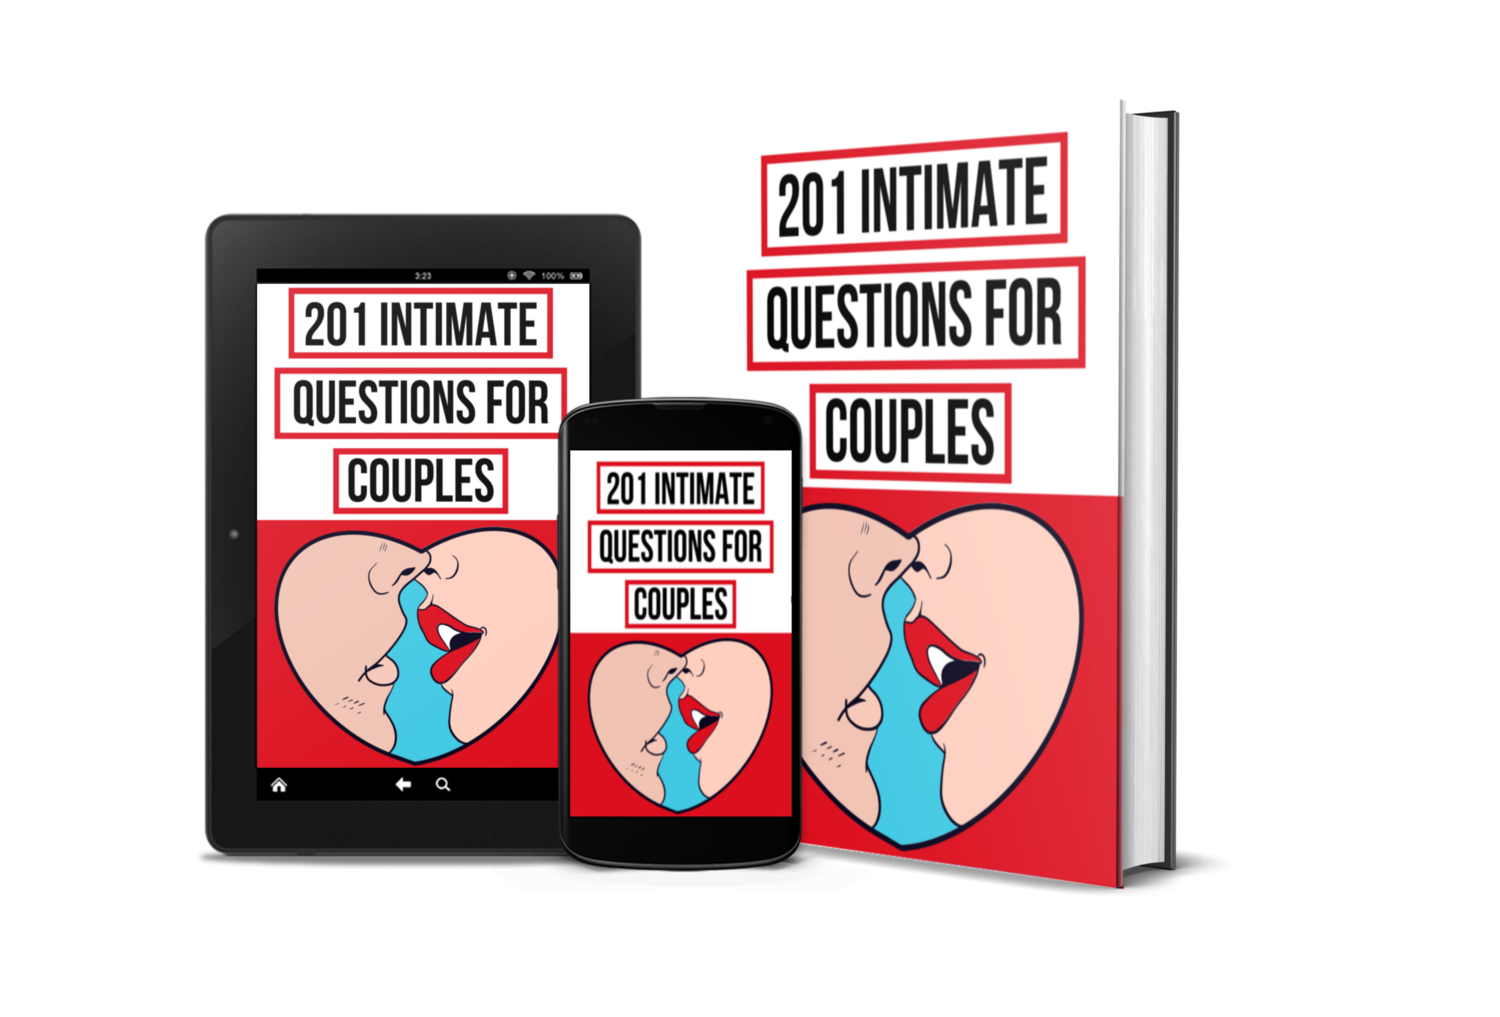 201 Intimate Questions For Couples